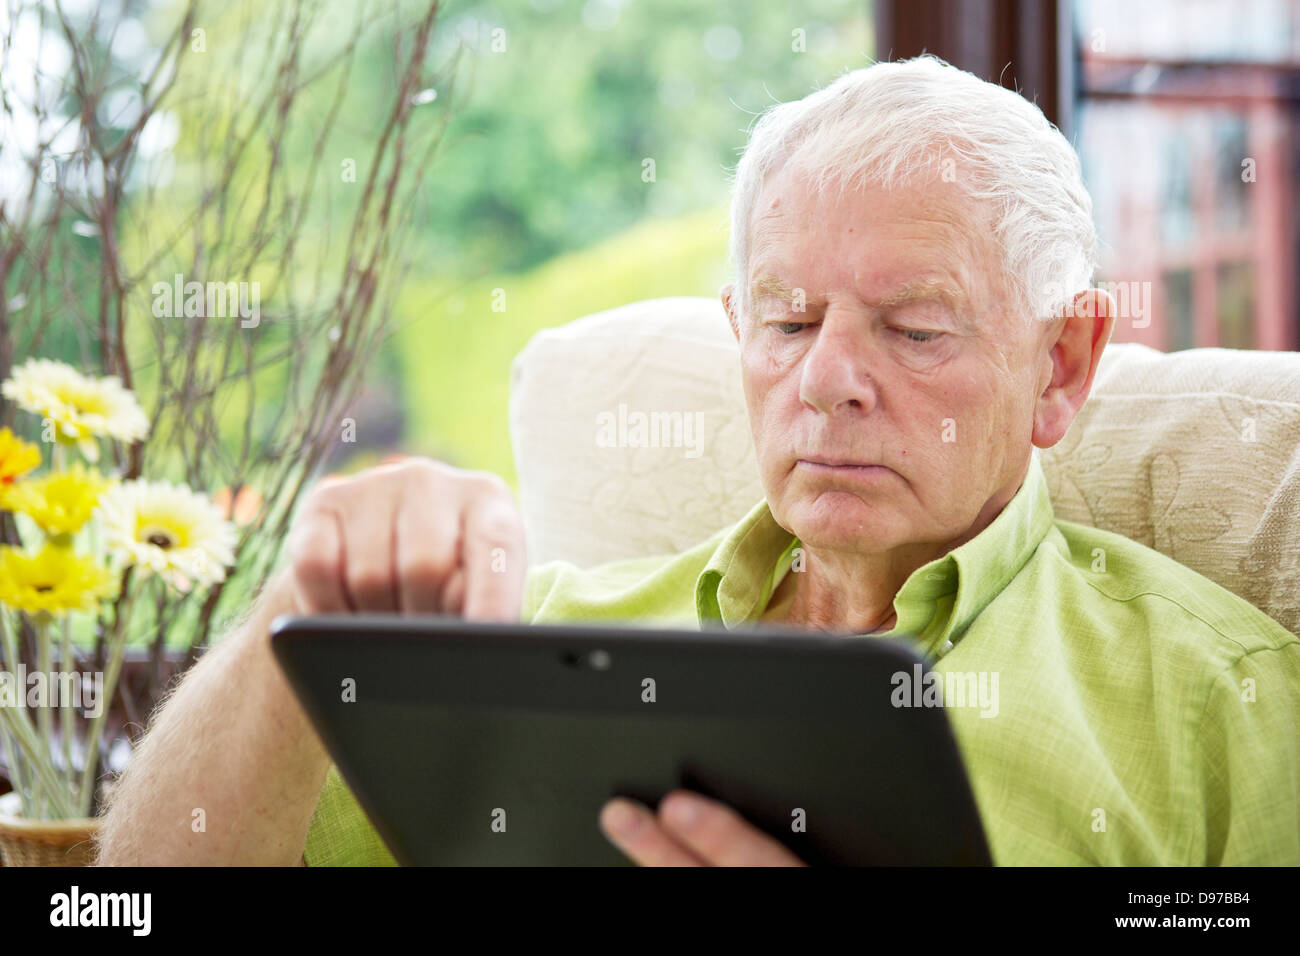 Seventies Man Technology Silver Surfer - Tablet Computer Stock Photo